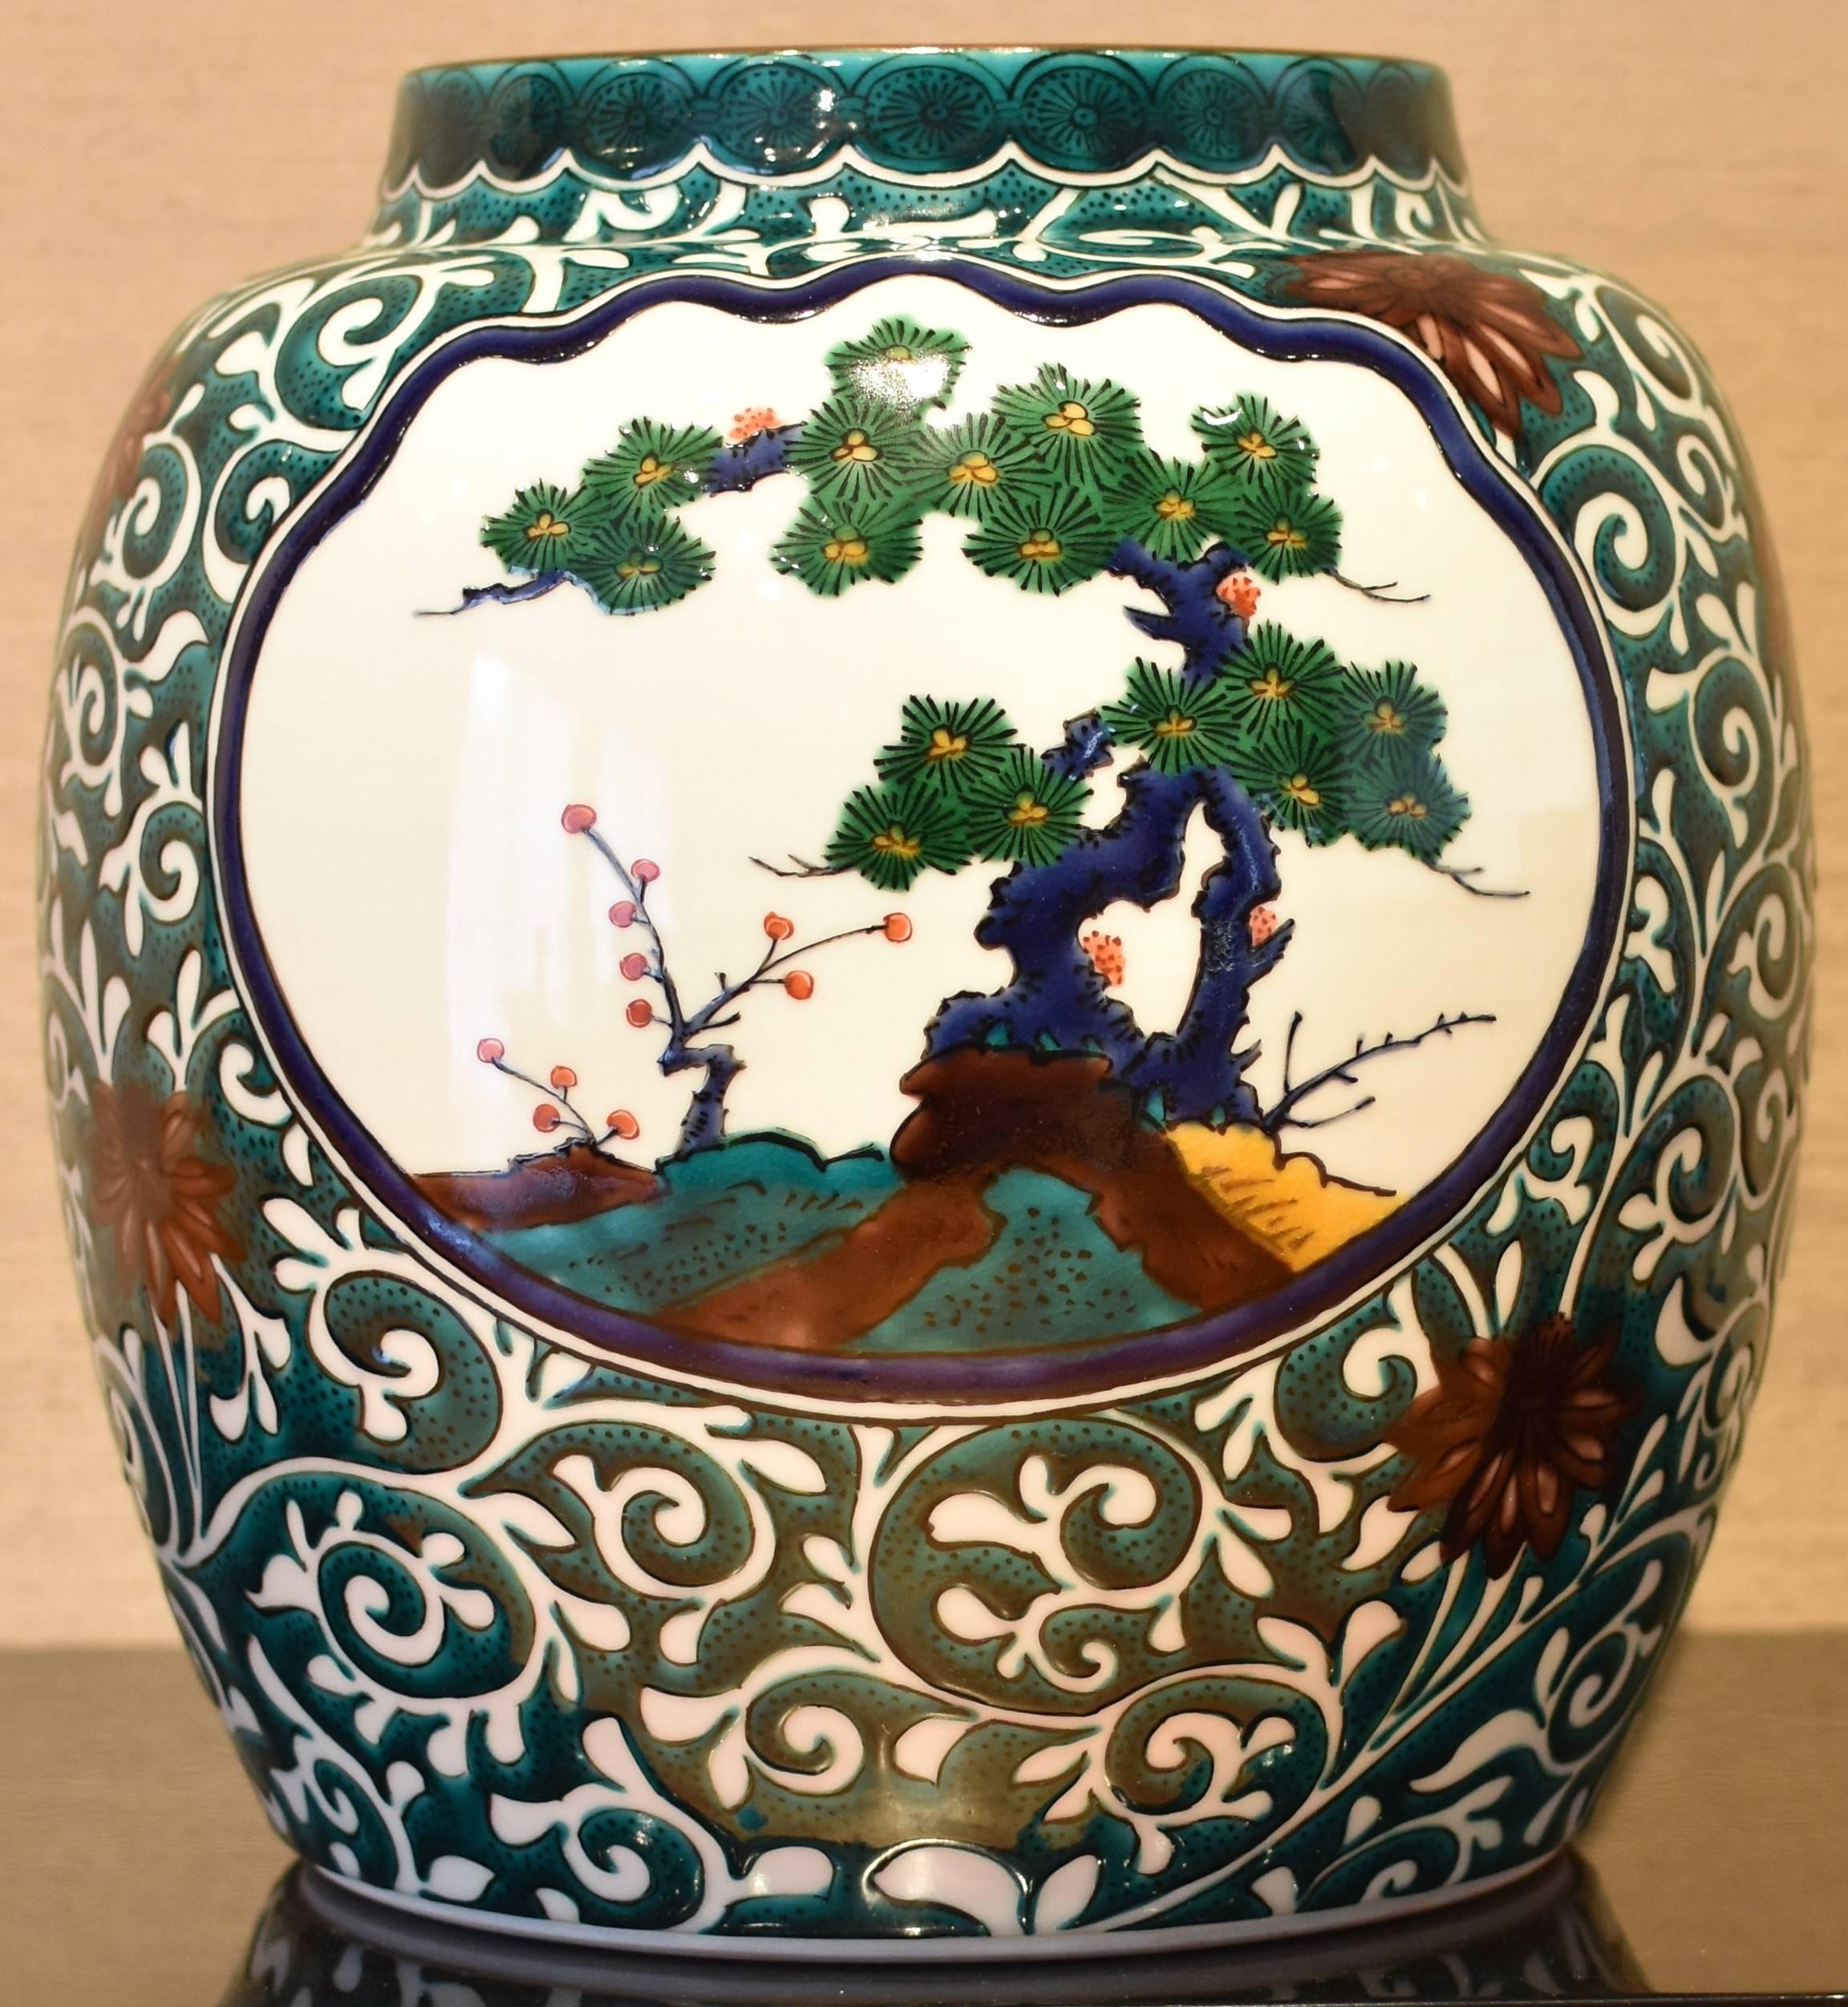 Exceptional Japanese contemporary Kutani decorative green porcelain vase, hand-painted on a strikingly shaped body, a signed masterpiece by  the third generation master of a Kutani kiln with a history of more than 140 years. This artist's life and